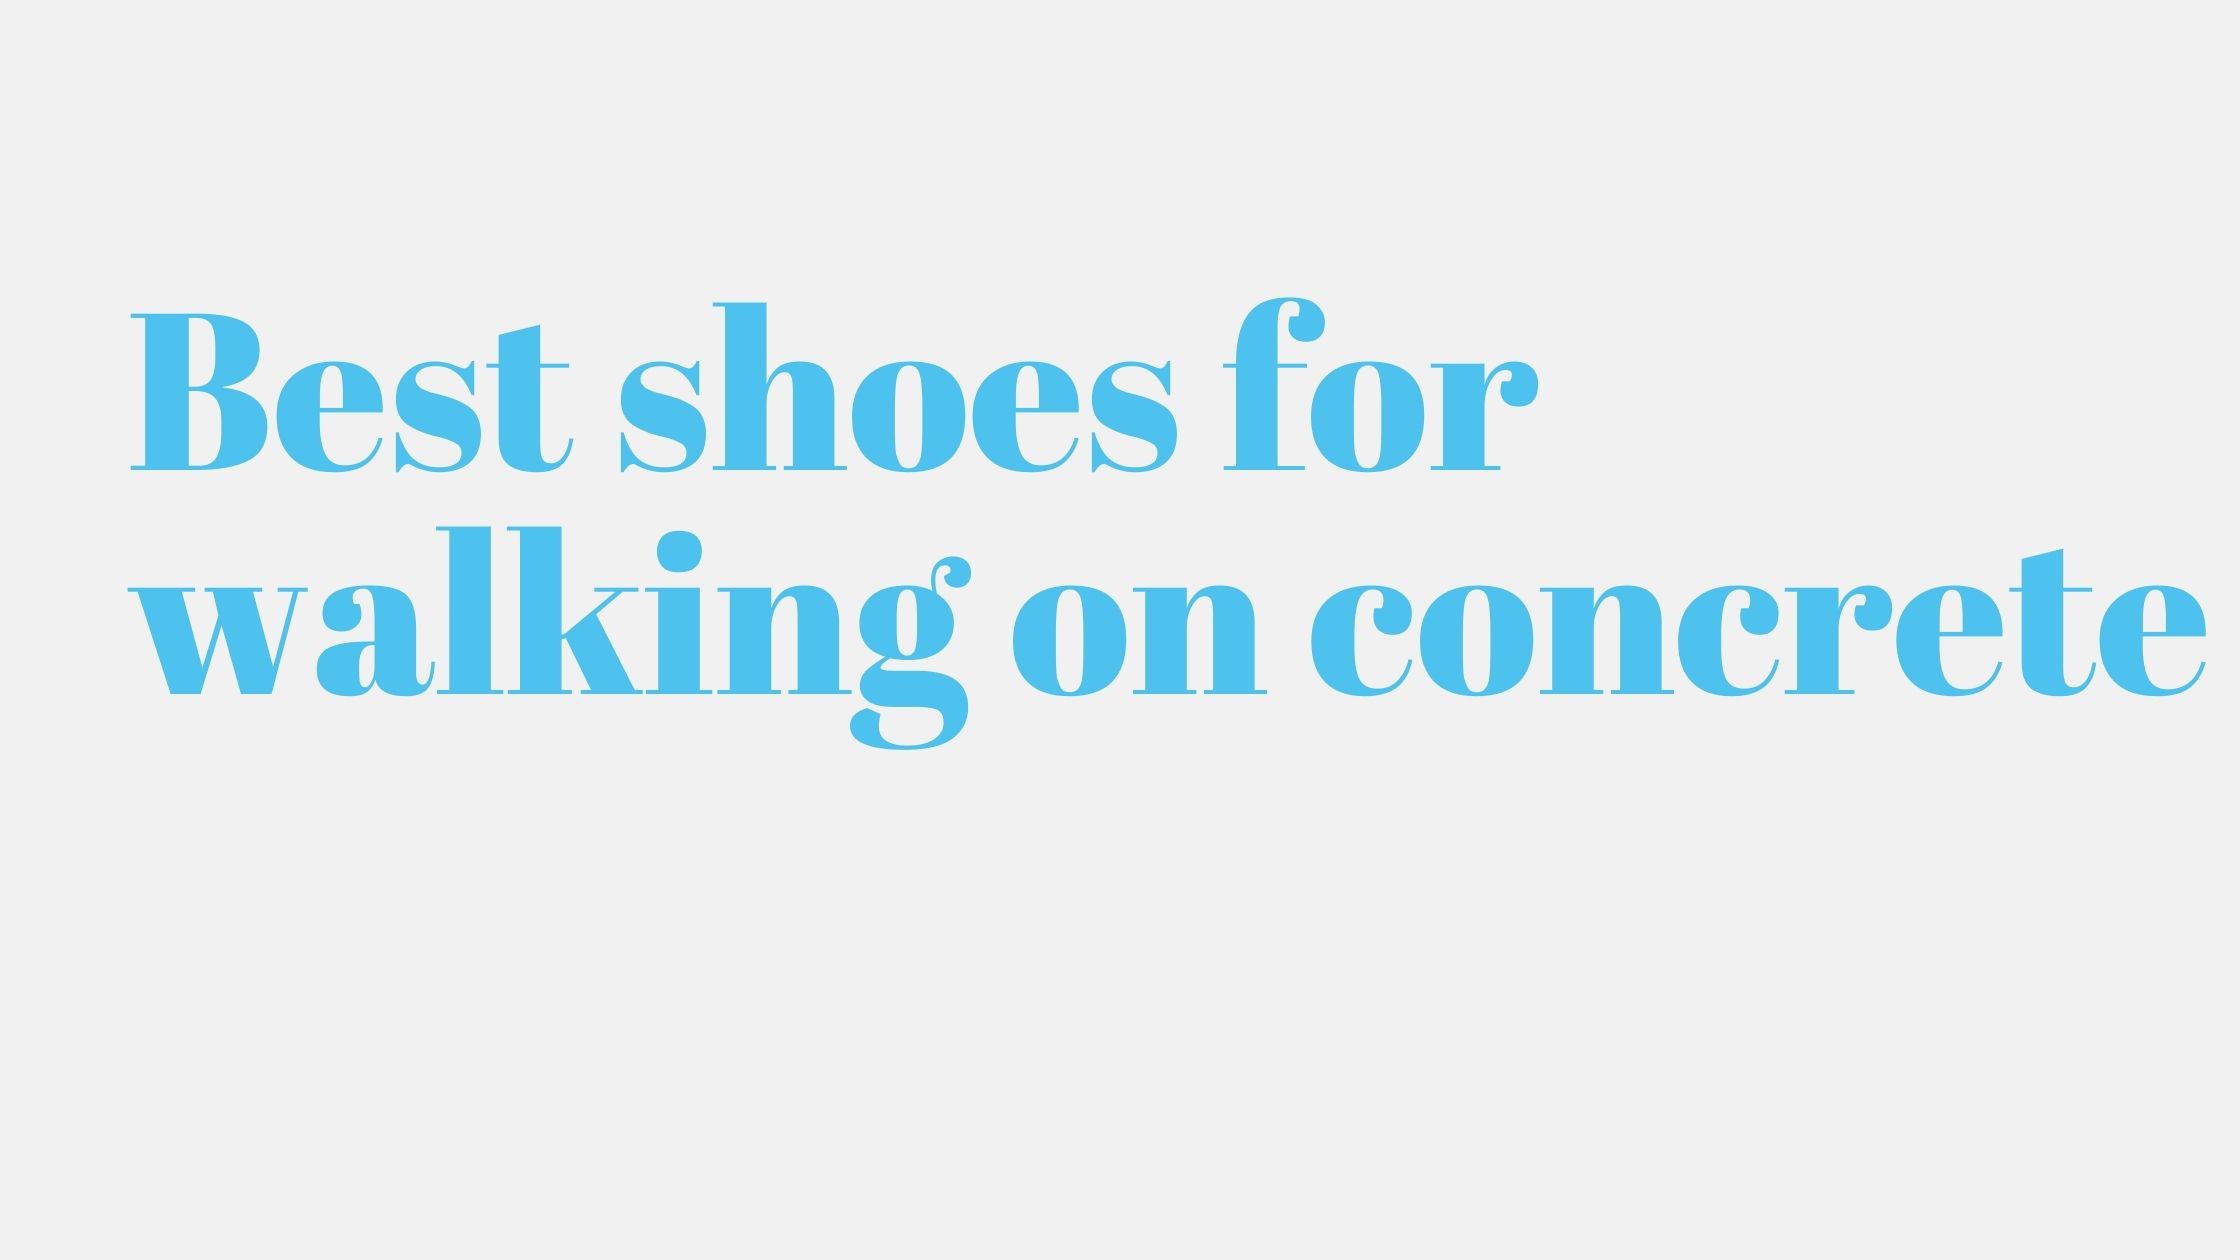 9 Best shoes for walking on concrete